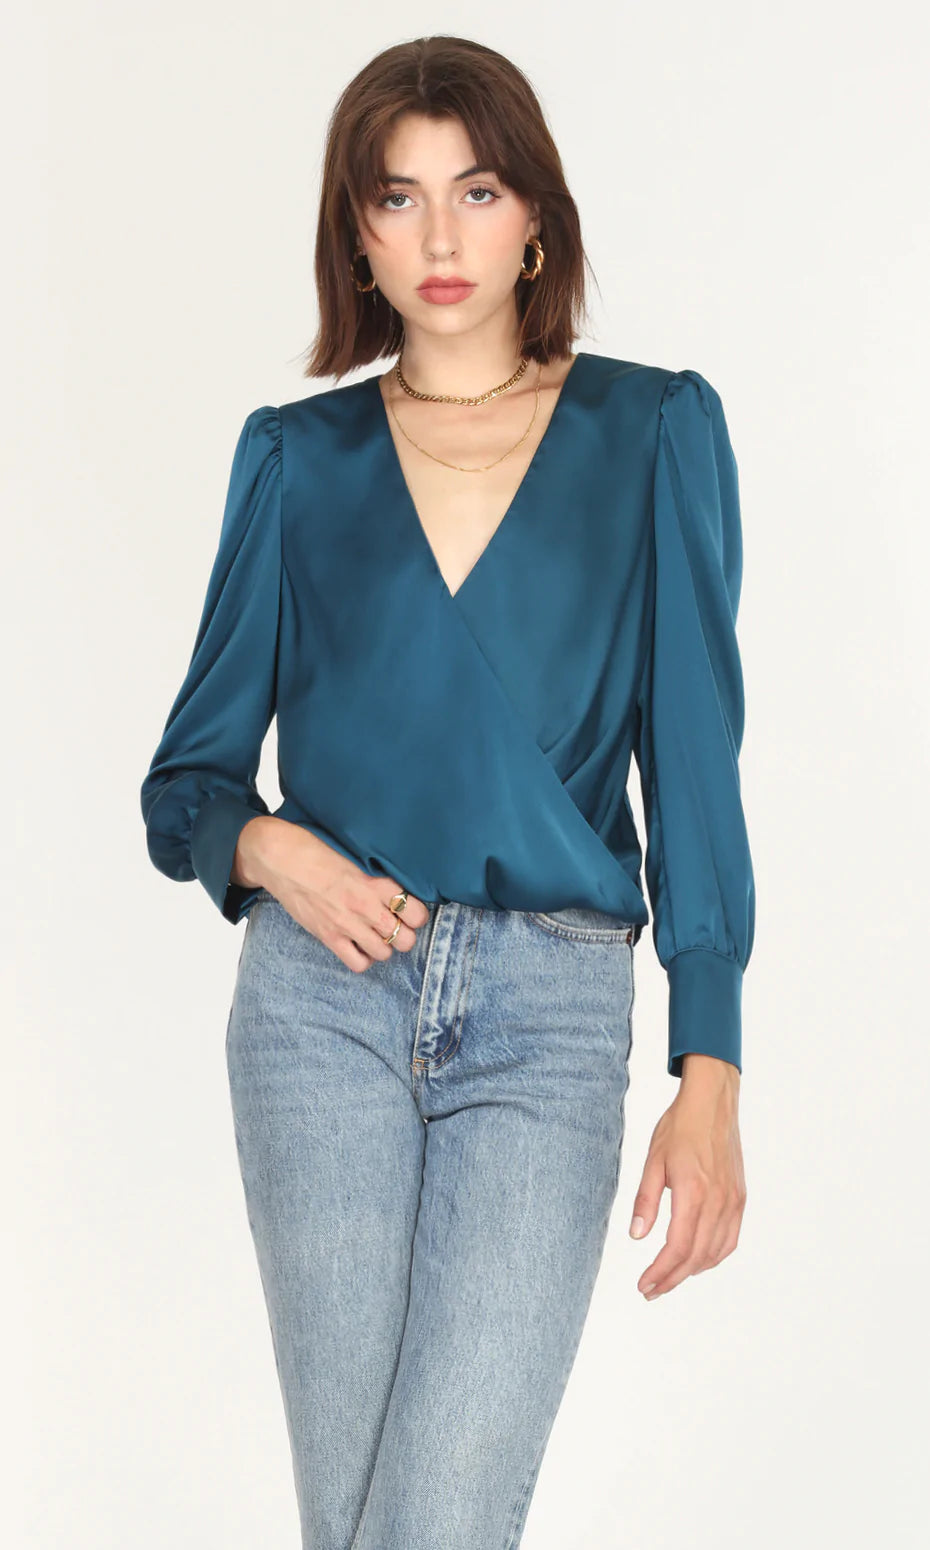 Teal Lourdes Wrap Front Cuffed Blouse